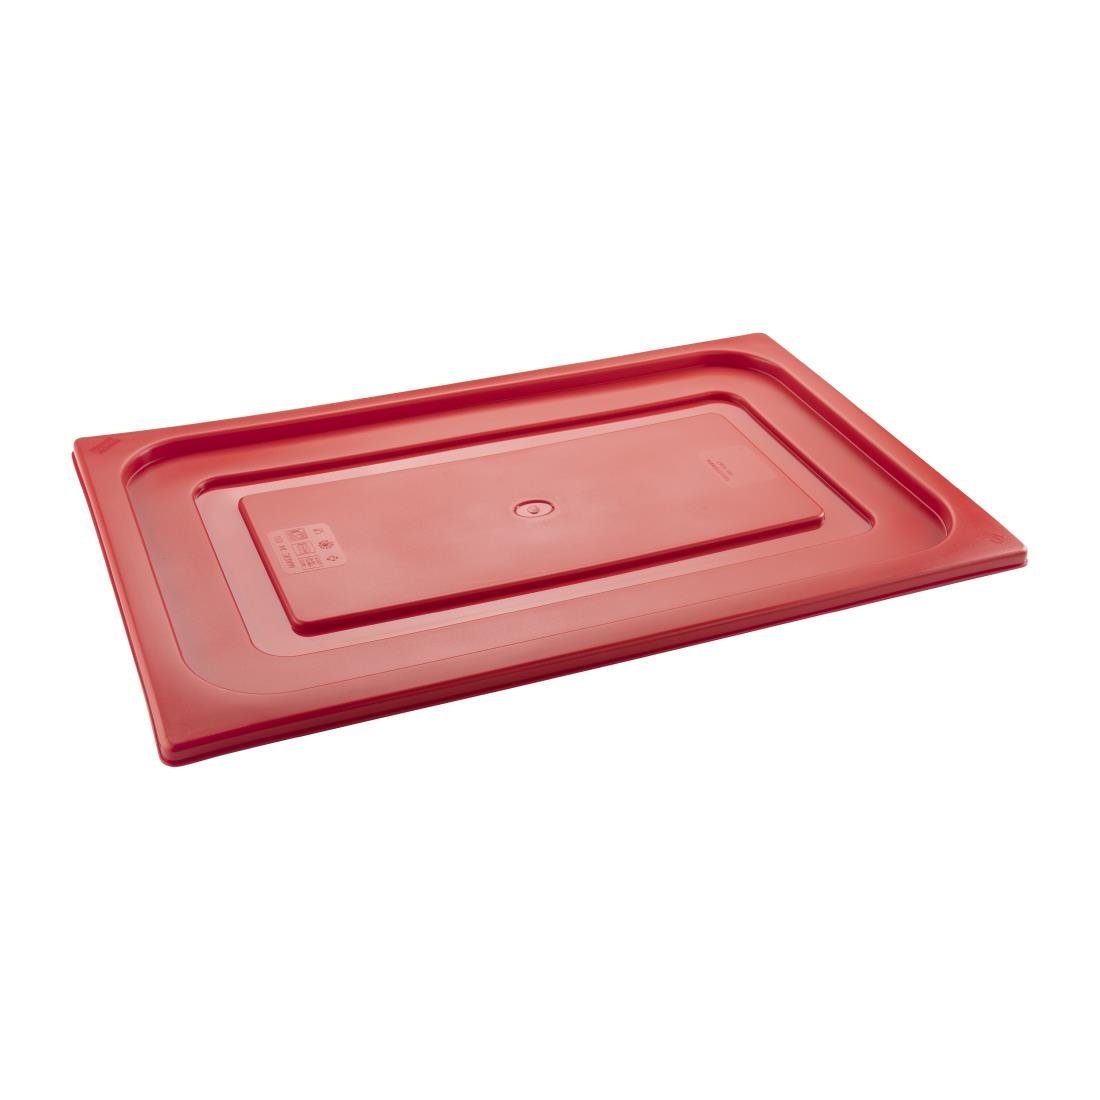 HT889 Pujadas Red Polinorm Gastronorm Lid 1/2GN